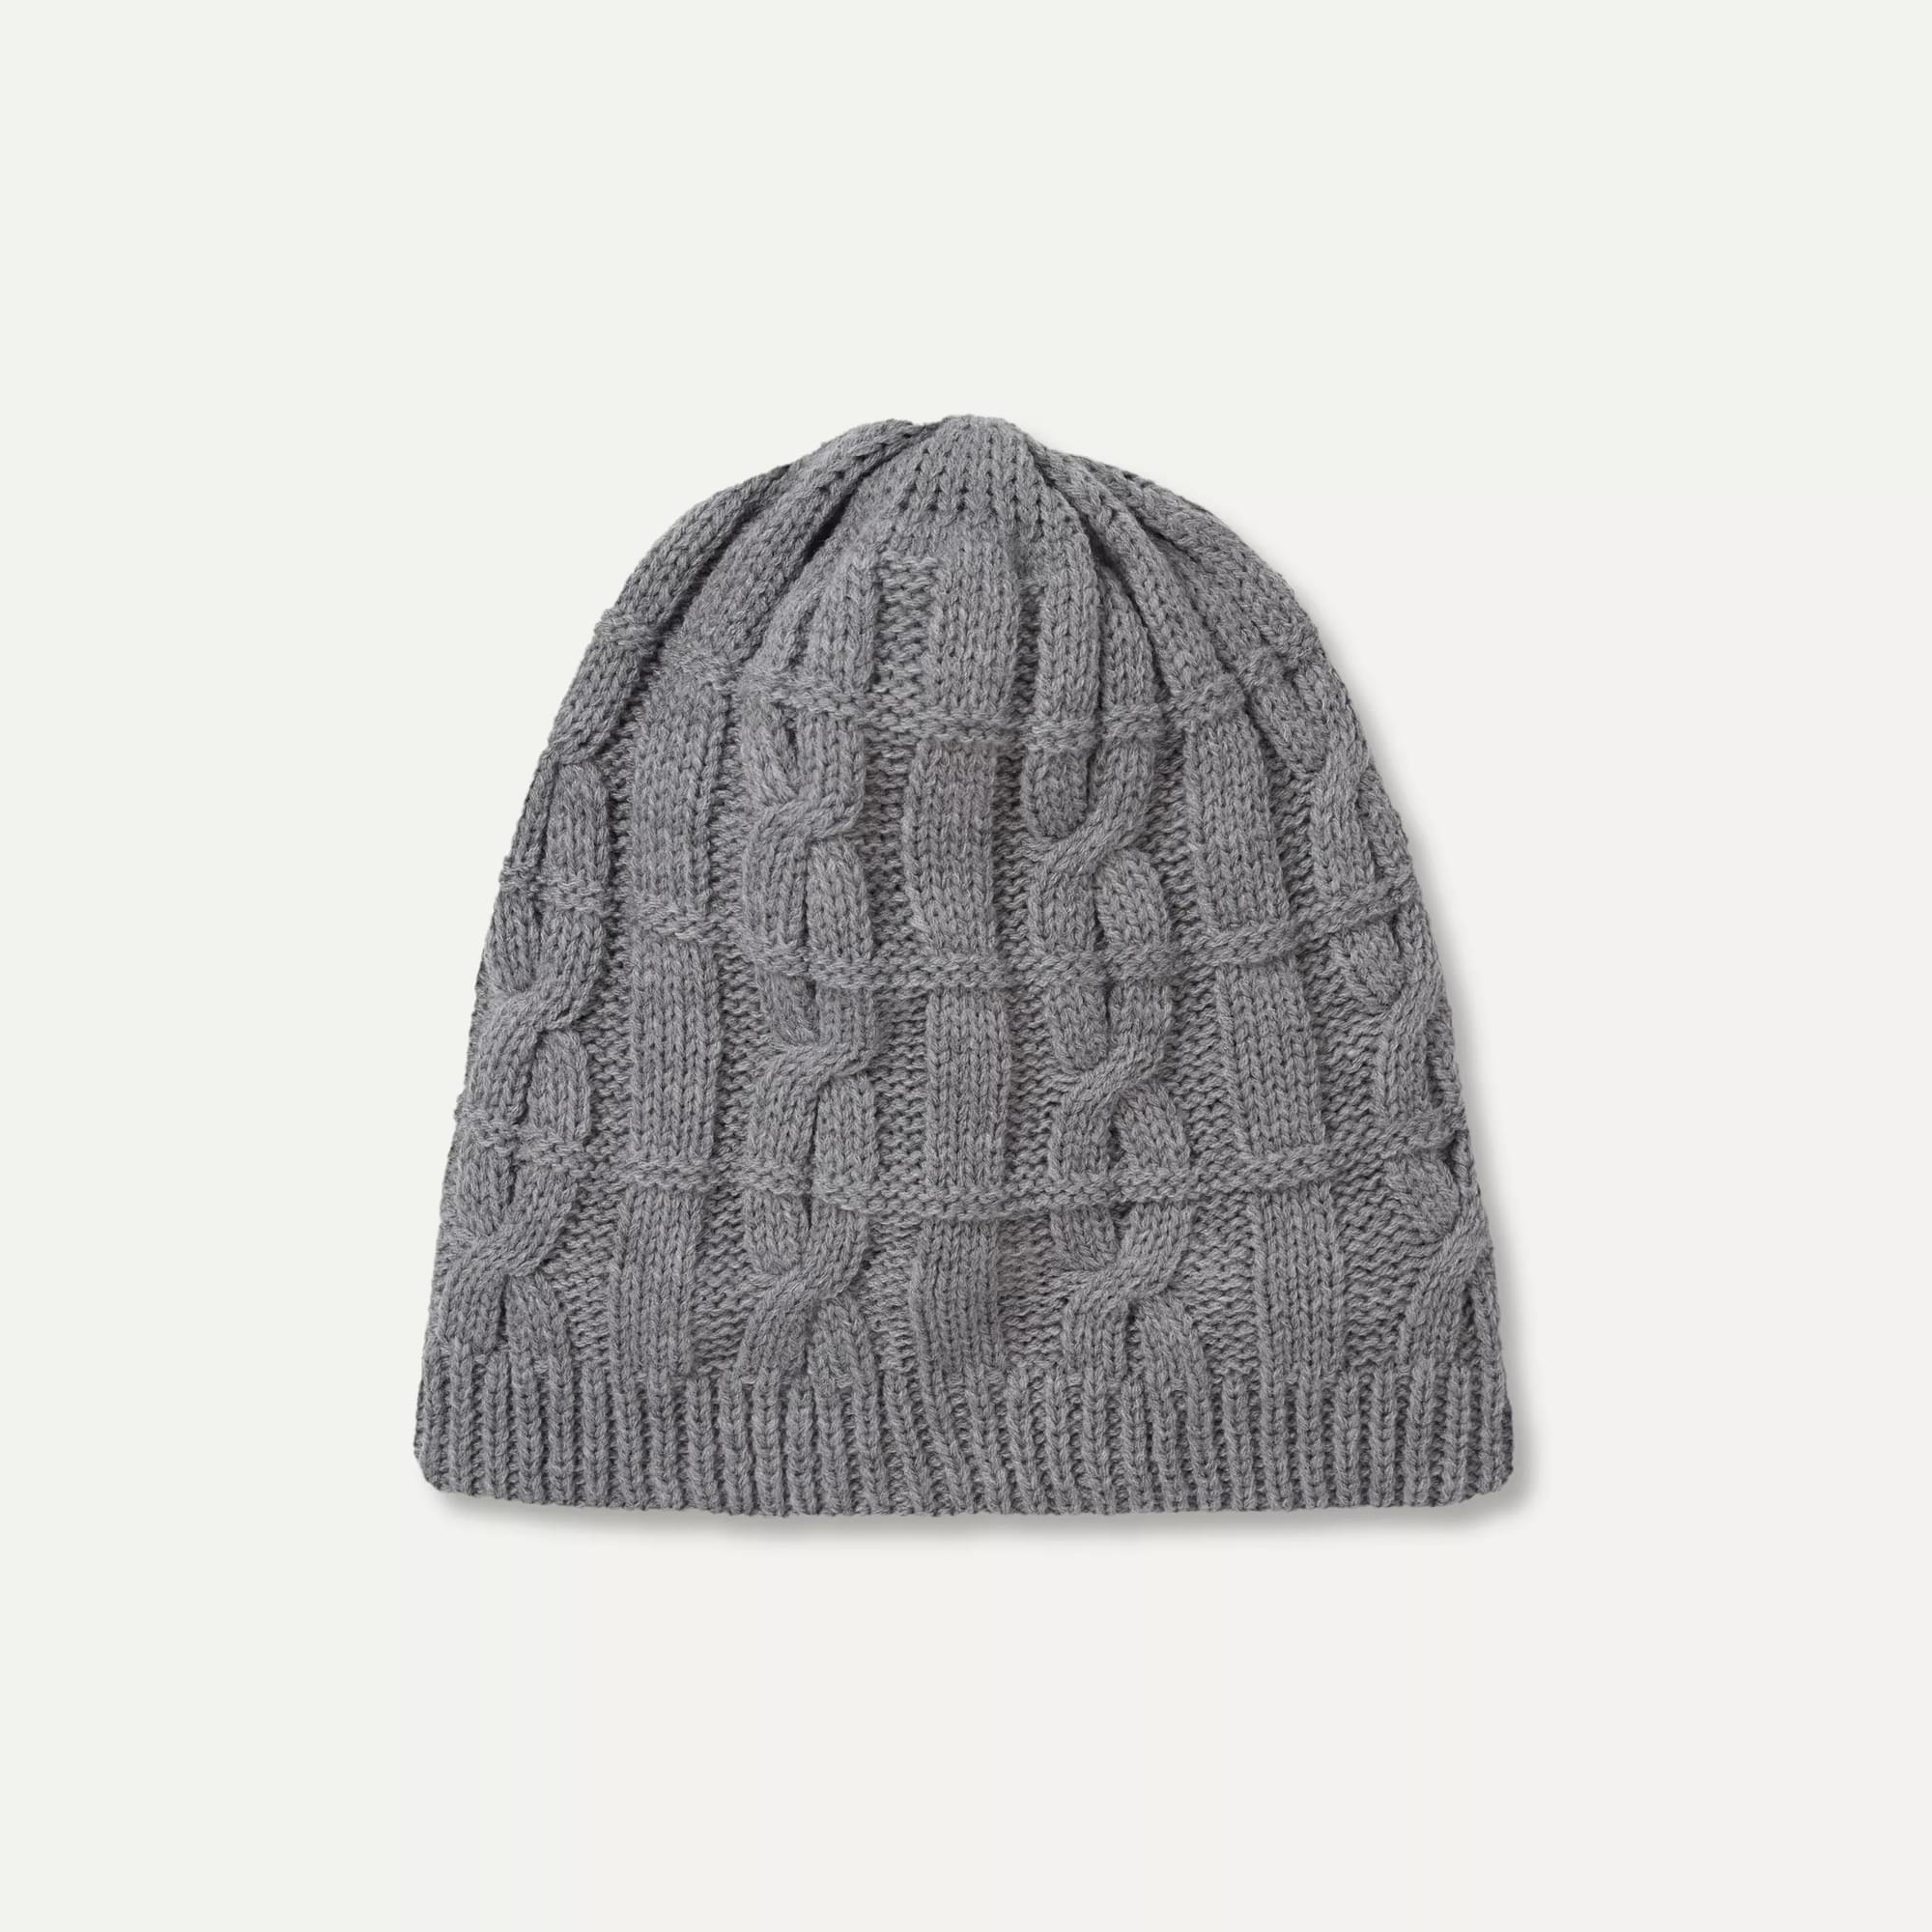 Blakeney - Waterproof Cold Weather Cable Knit Beanie Hat